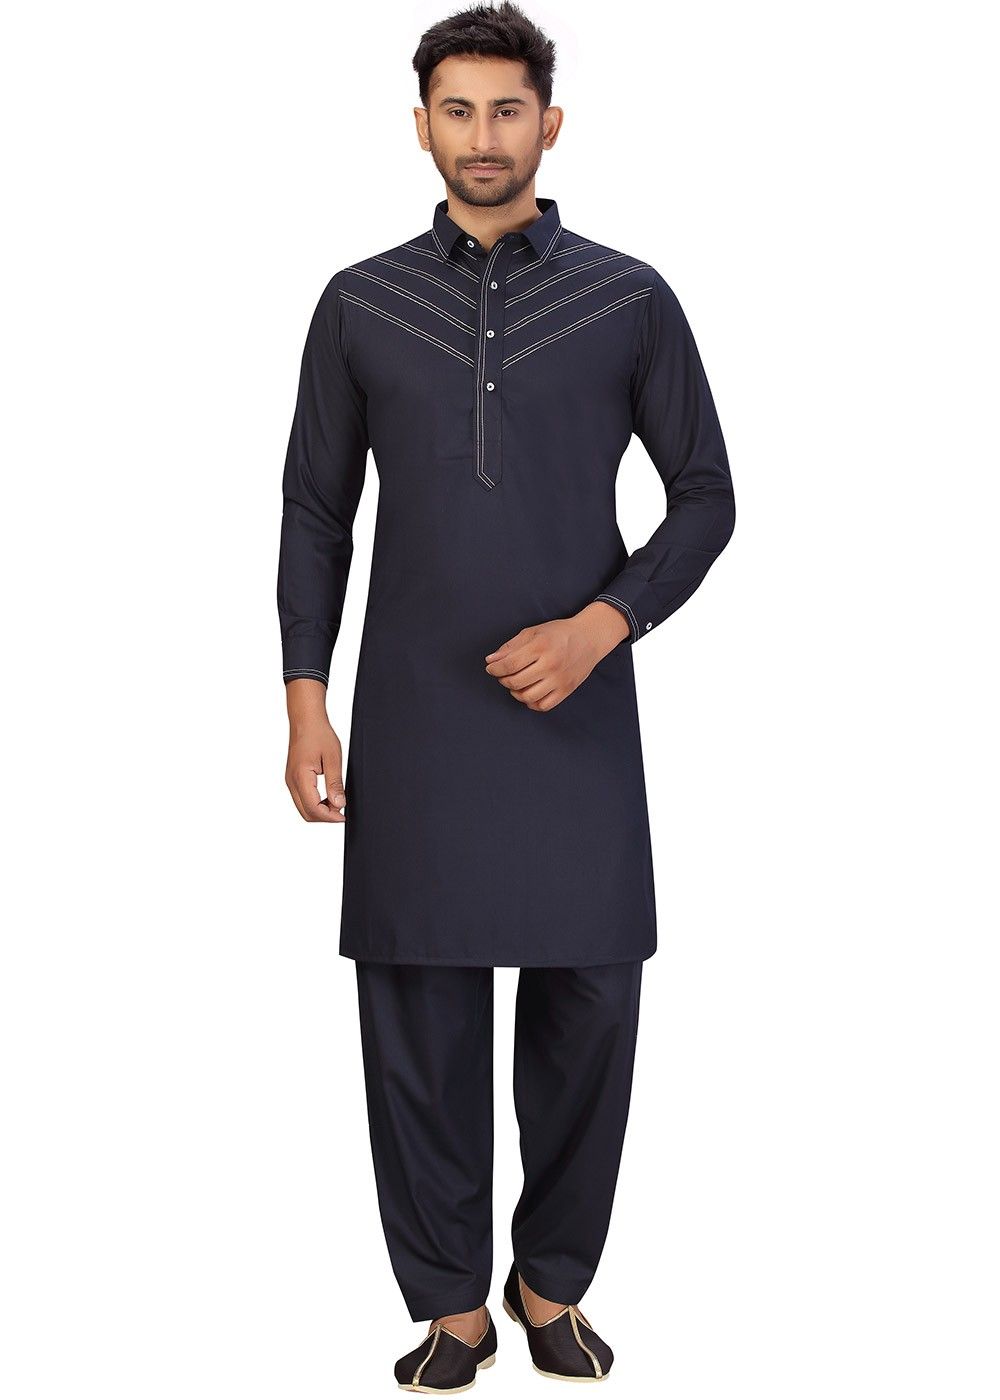 Off White Designer Pathani Suit For Men In Linen Fabric